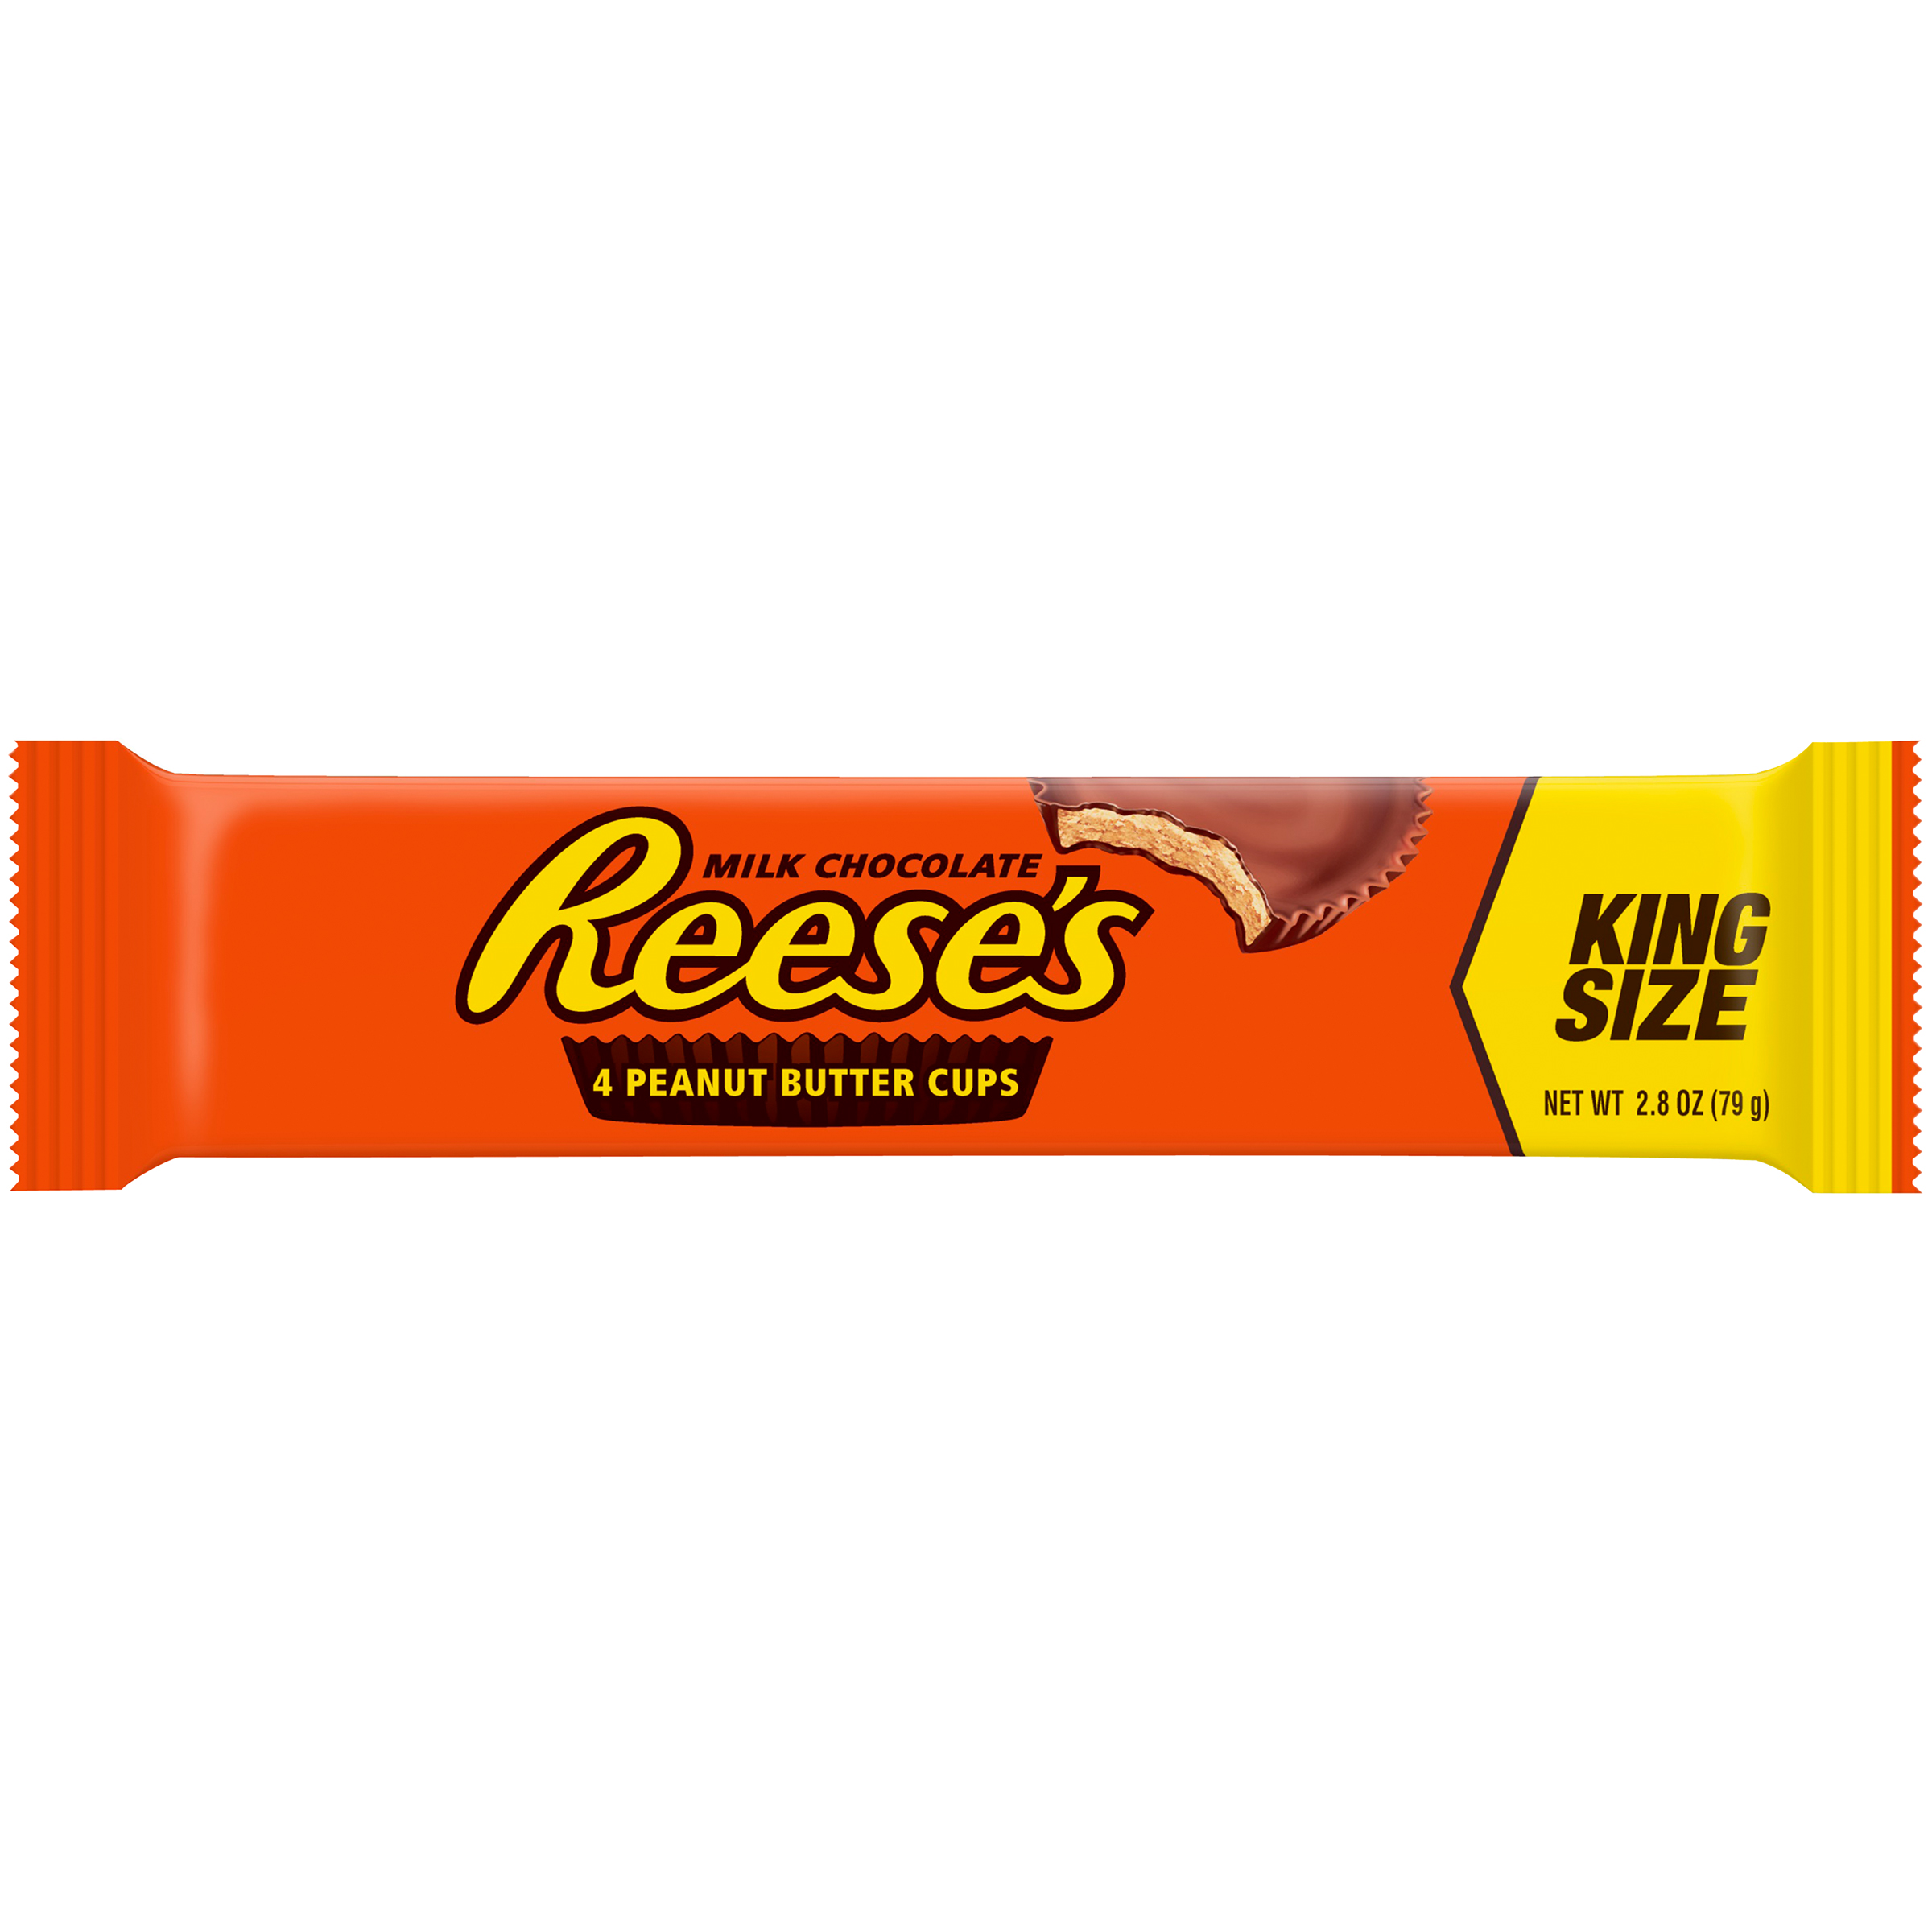 Reese's Peanut Butter Cups, Milk Chocolate, King Size, 4 cups [2.8 oz ...